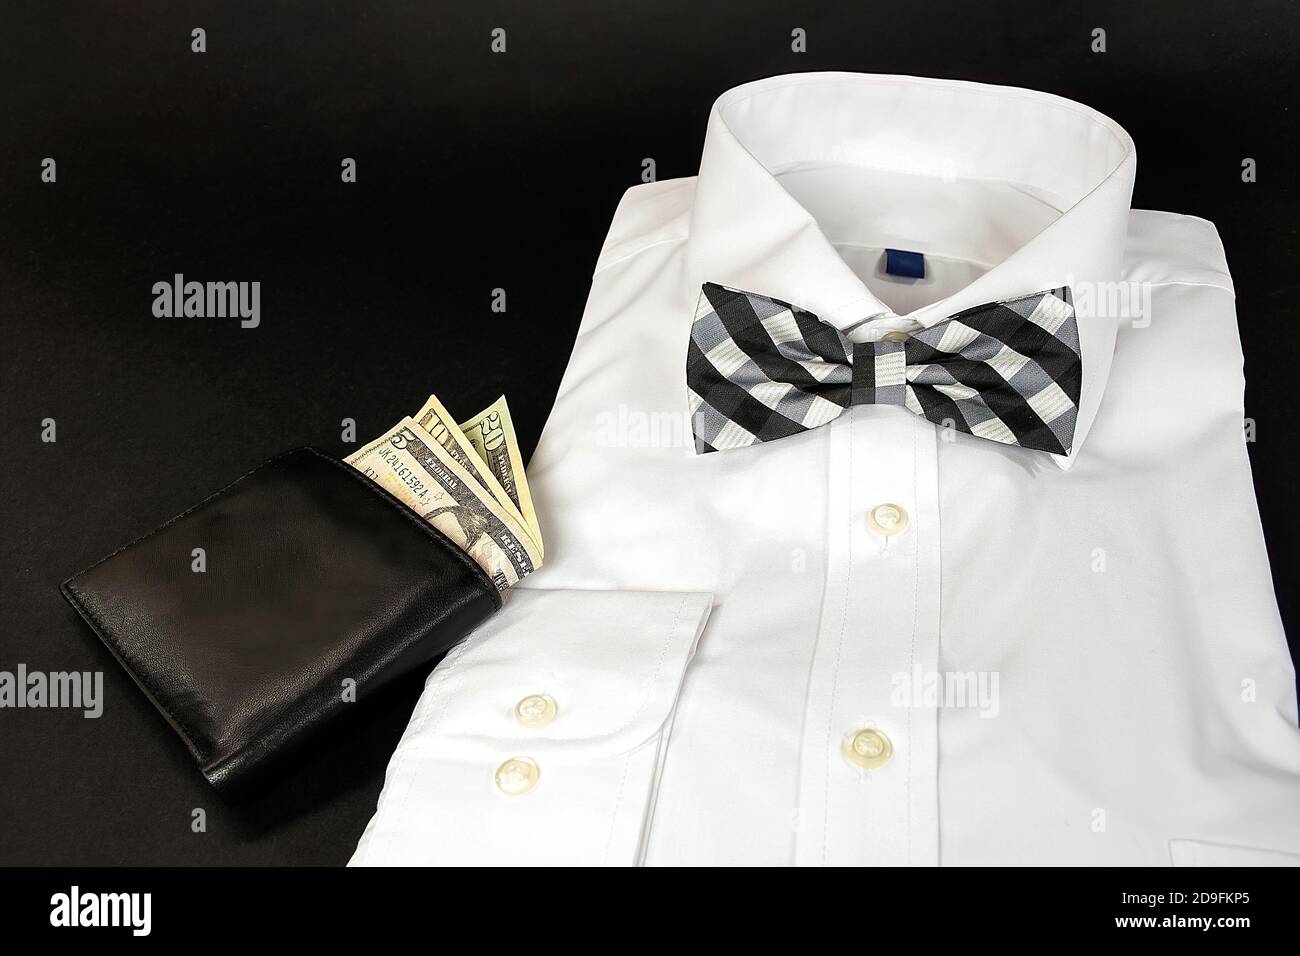 Folded white dress shirt with black and white plaid bow tie and leather wallet on black background Stock Photo